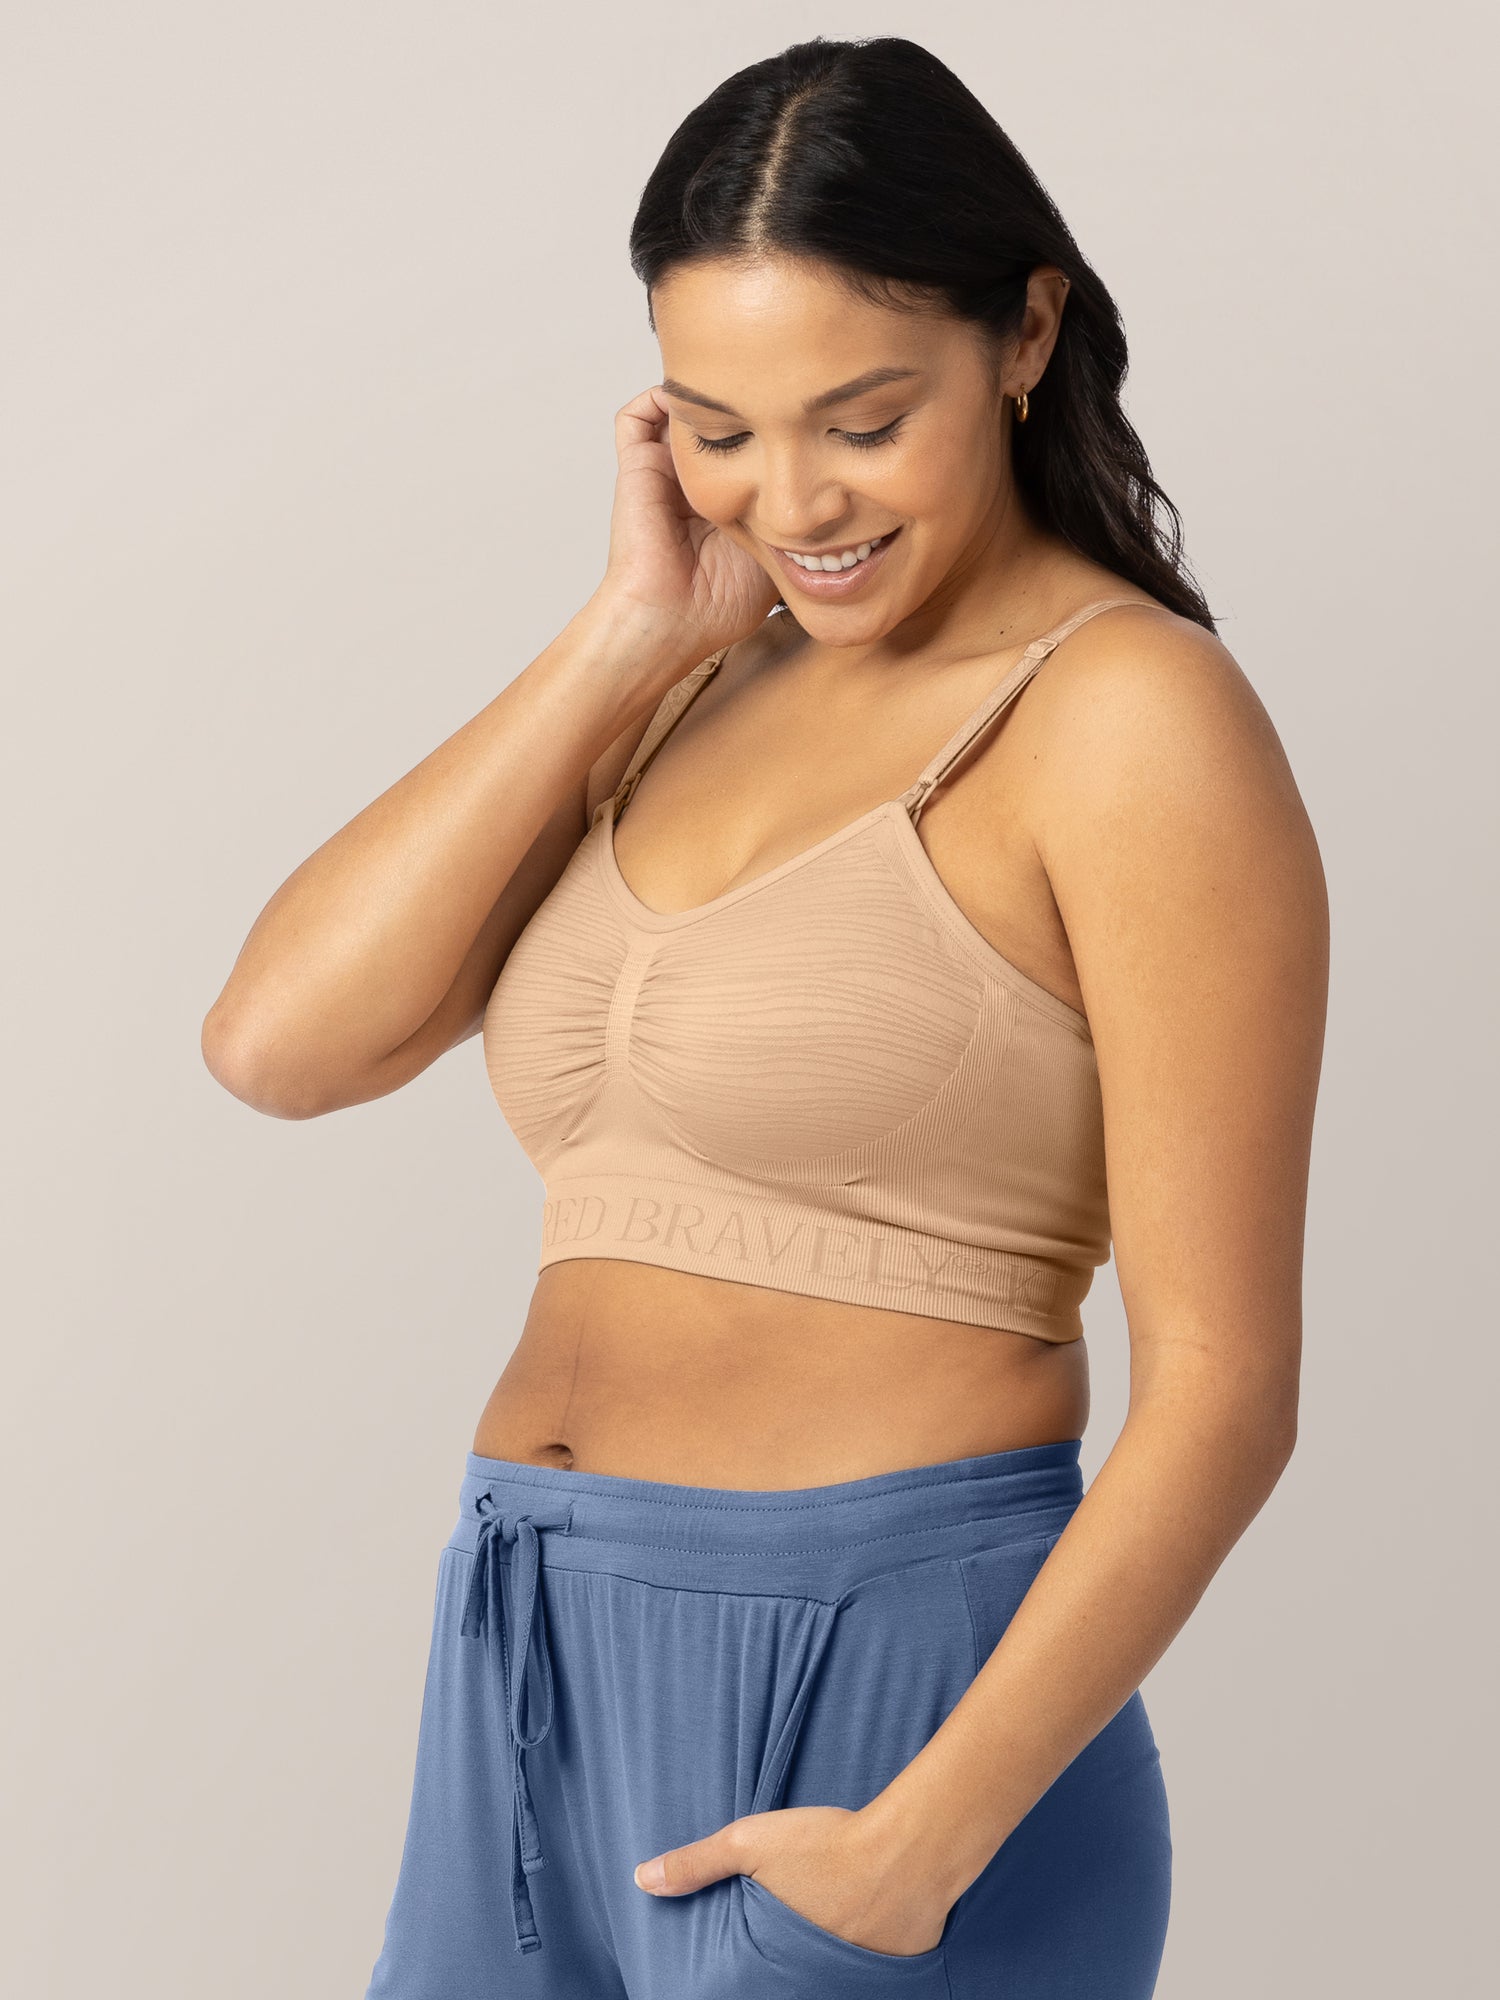 Nursing & Hands-Free Pumping Sports Bra 3.0 – Love and Fit